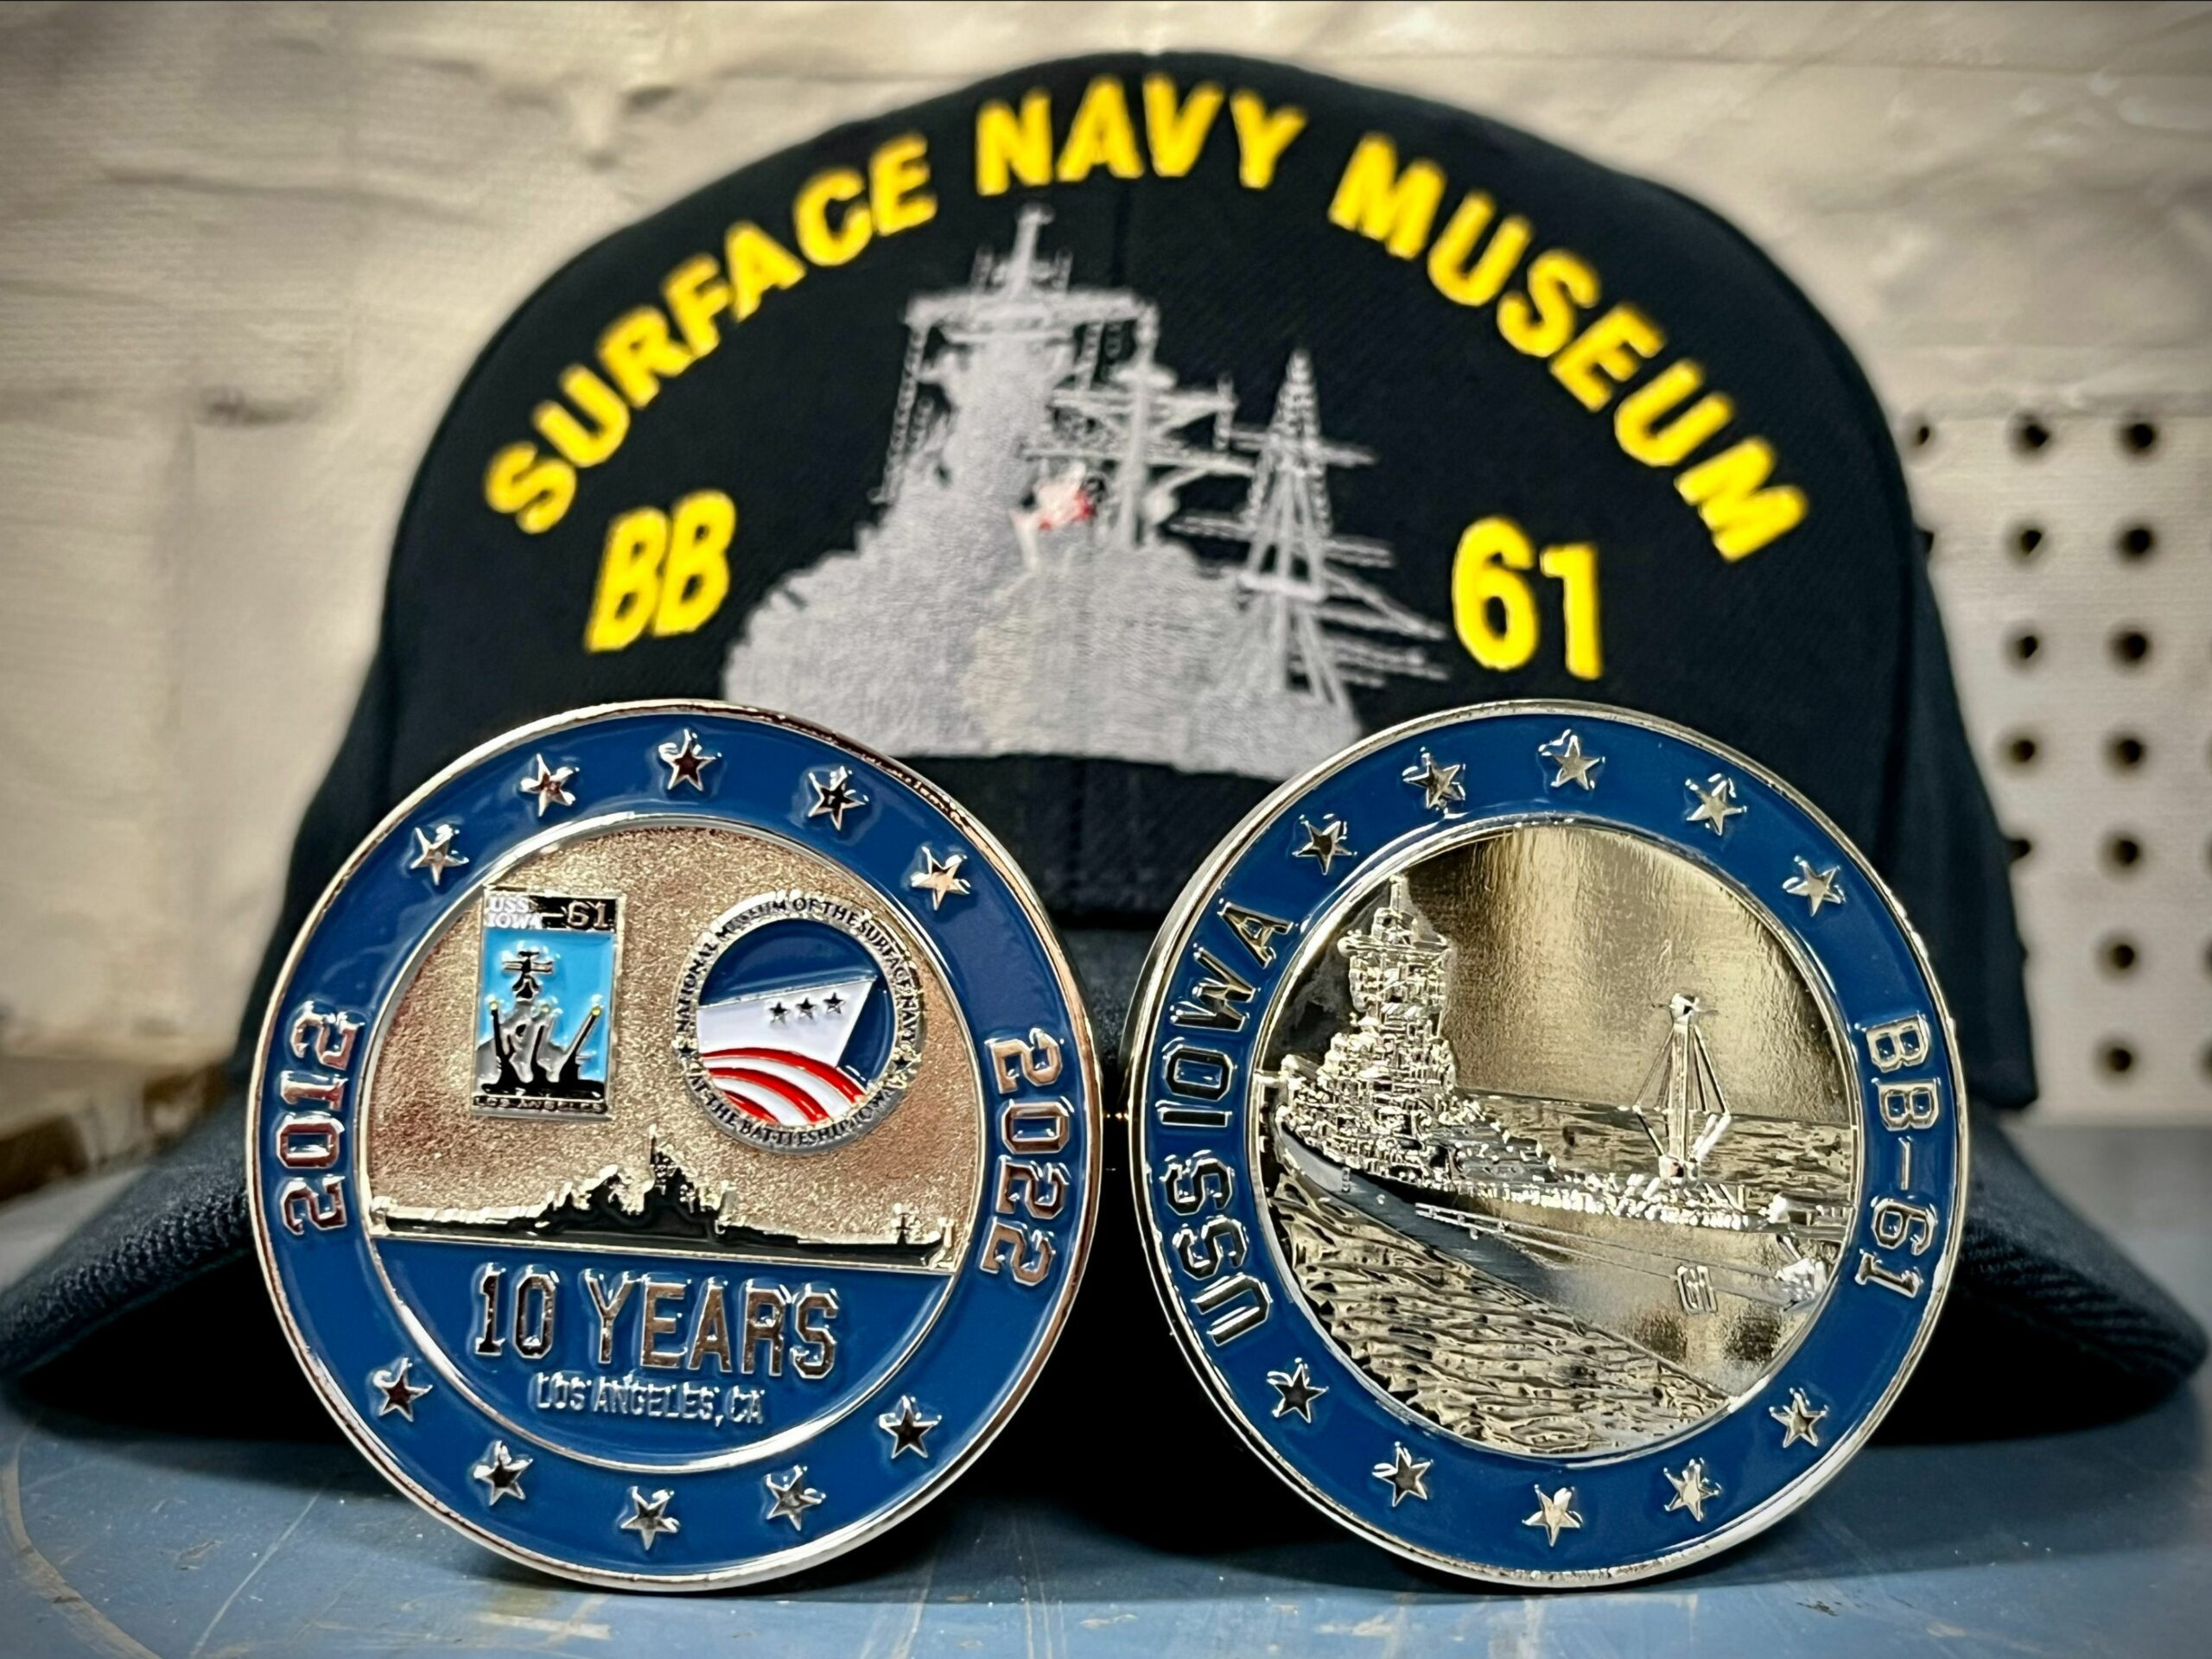 National Museum of the Surface Navy logo